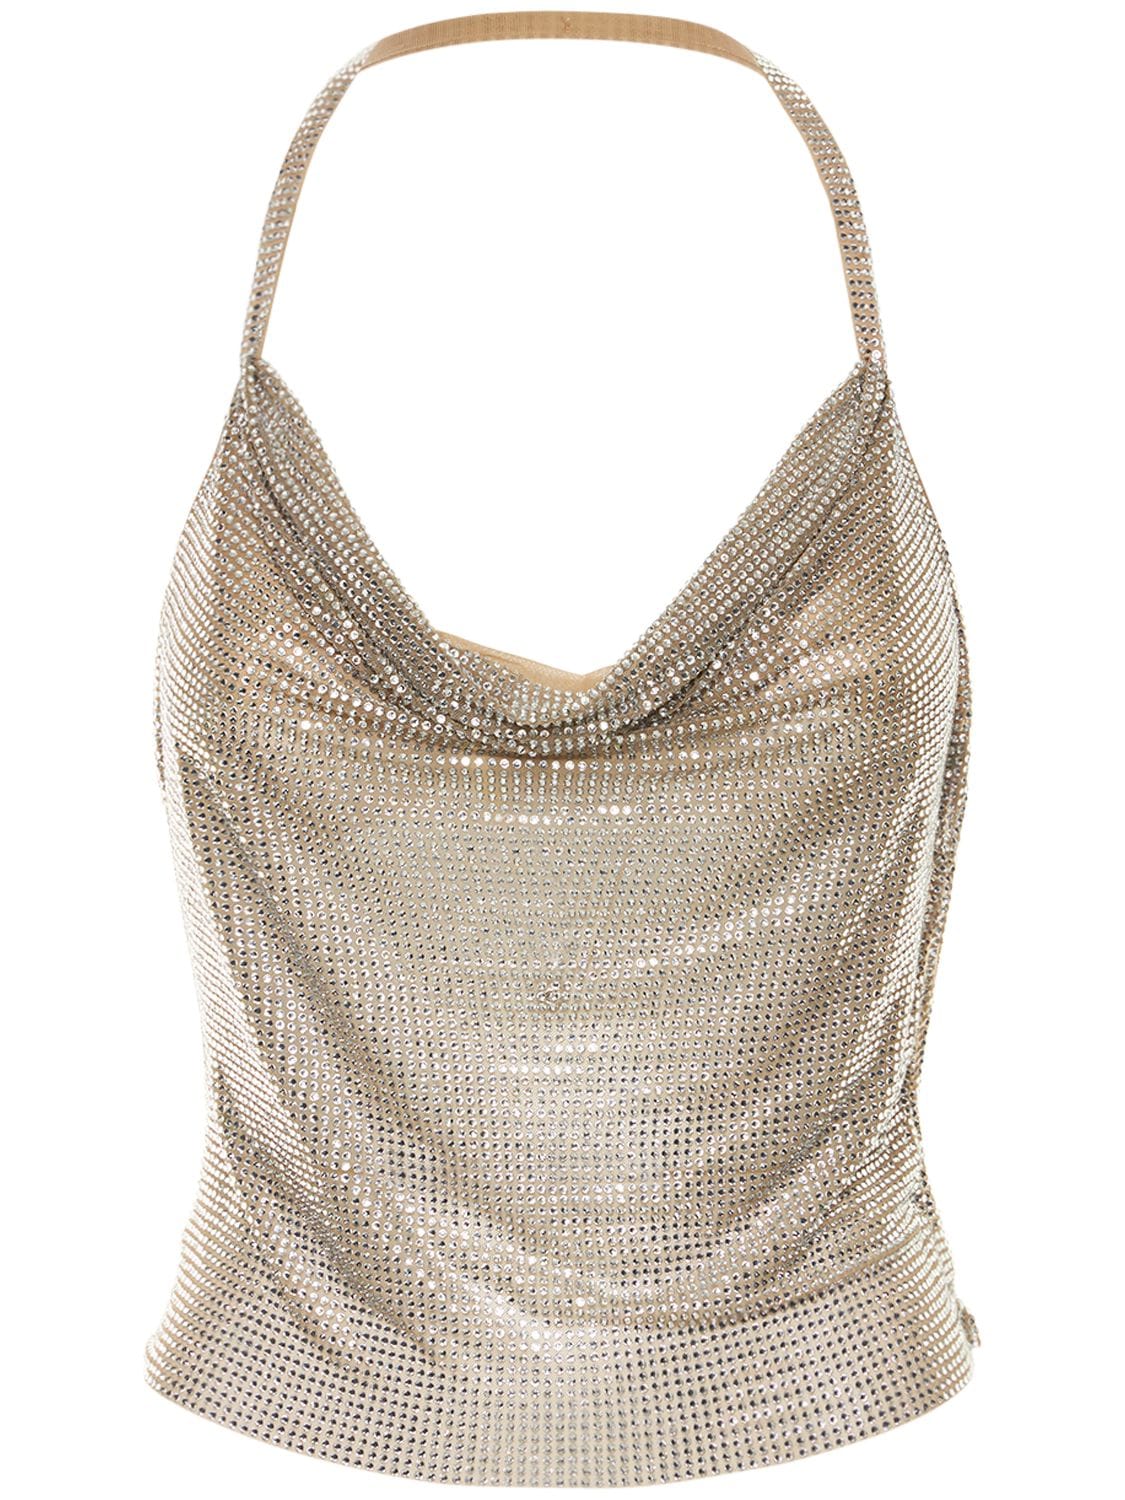 GIUSEPPE DI MORABITO EMBELLISHED STRETCH JERSEY TOP